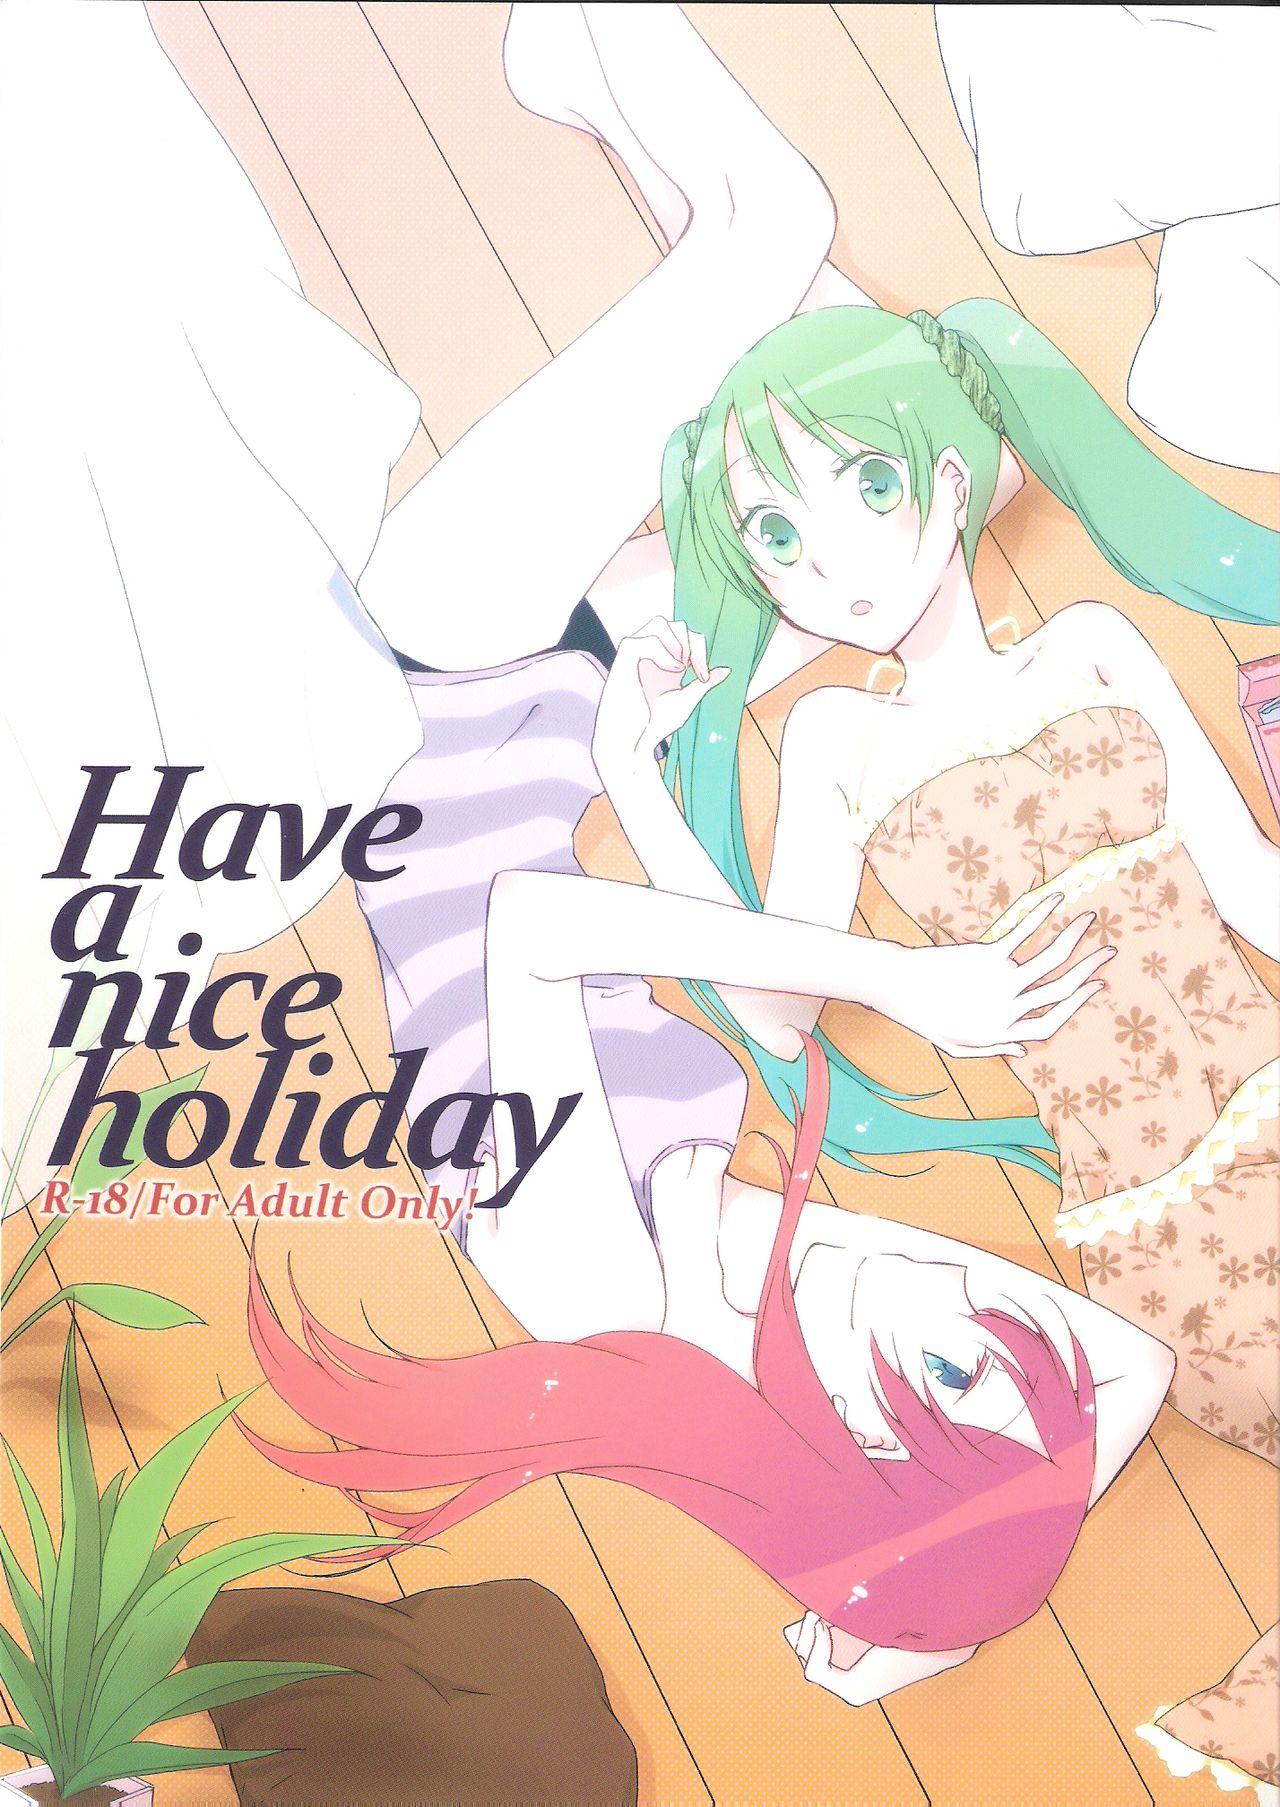 Women Fucking Have a nice holiday - Vocaloid Voyeur - Page 2